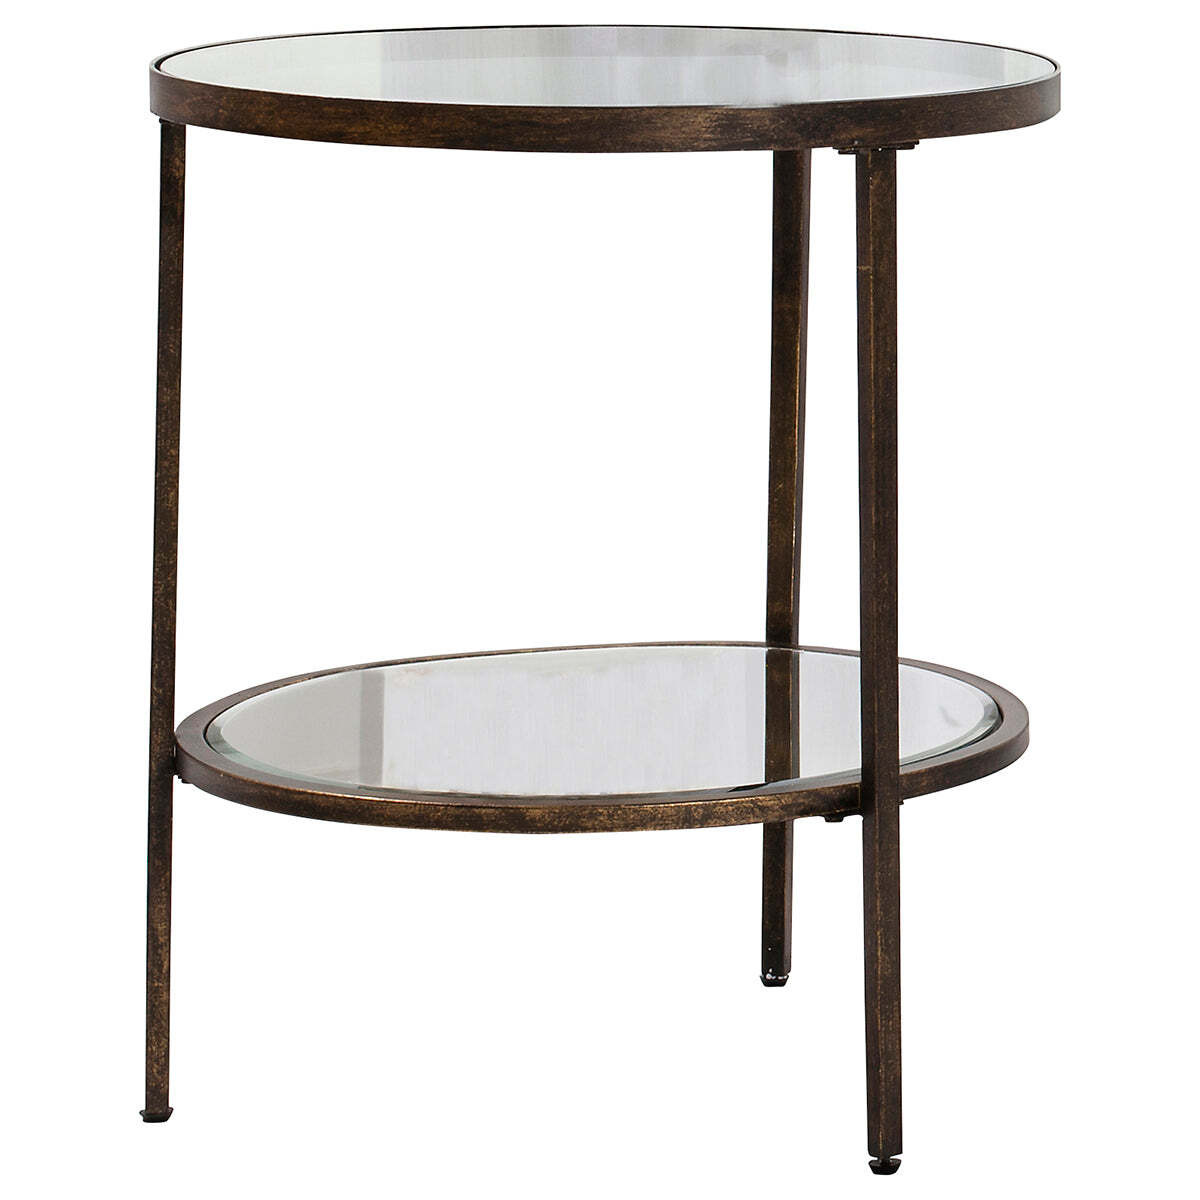 Gallery Interiors Hudson Side Table in Aged Bronze - image 1